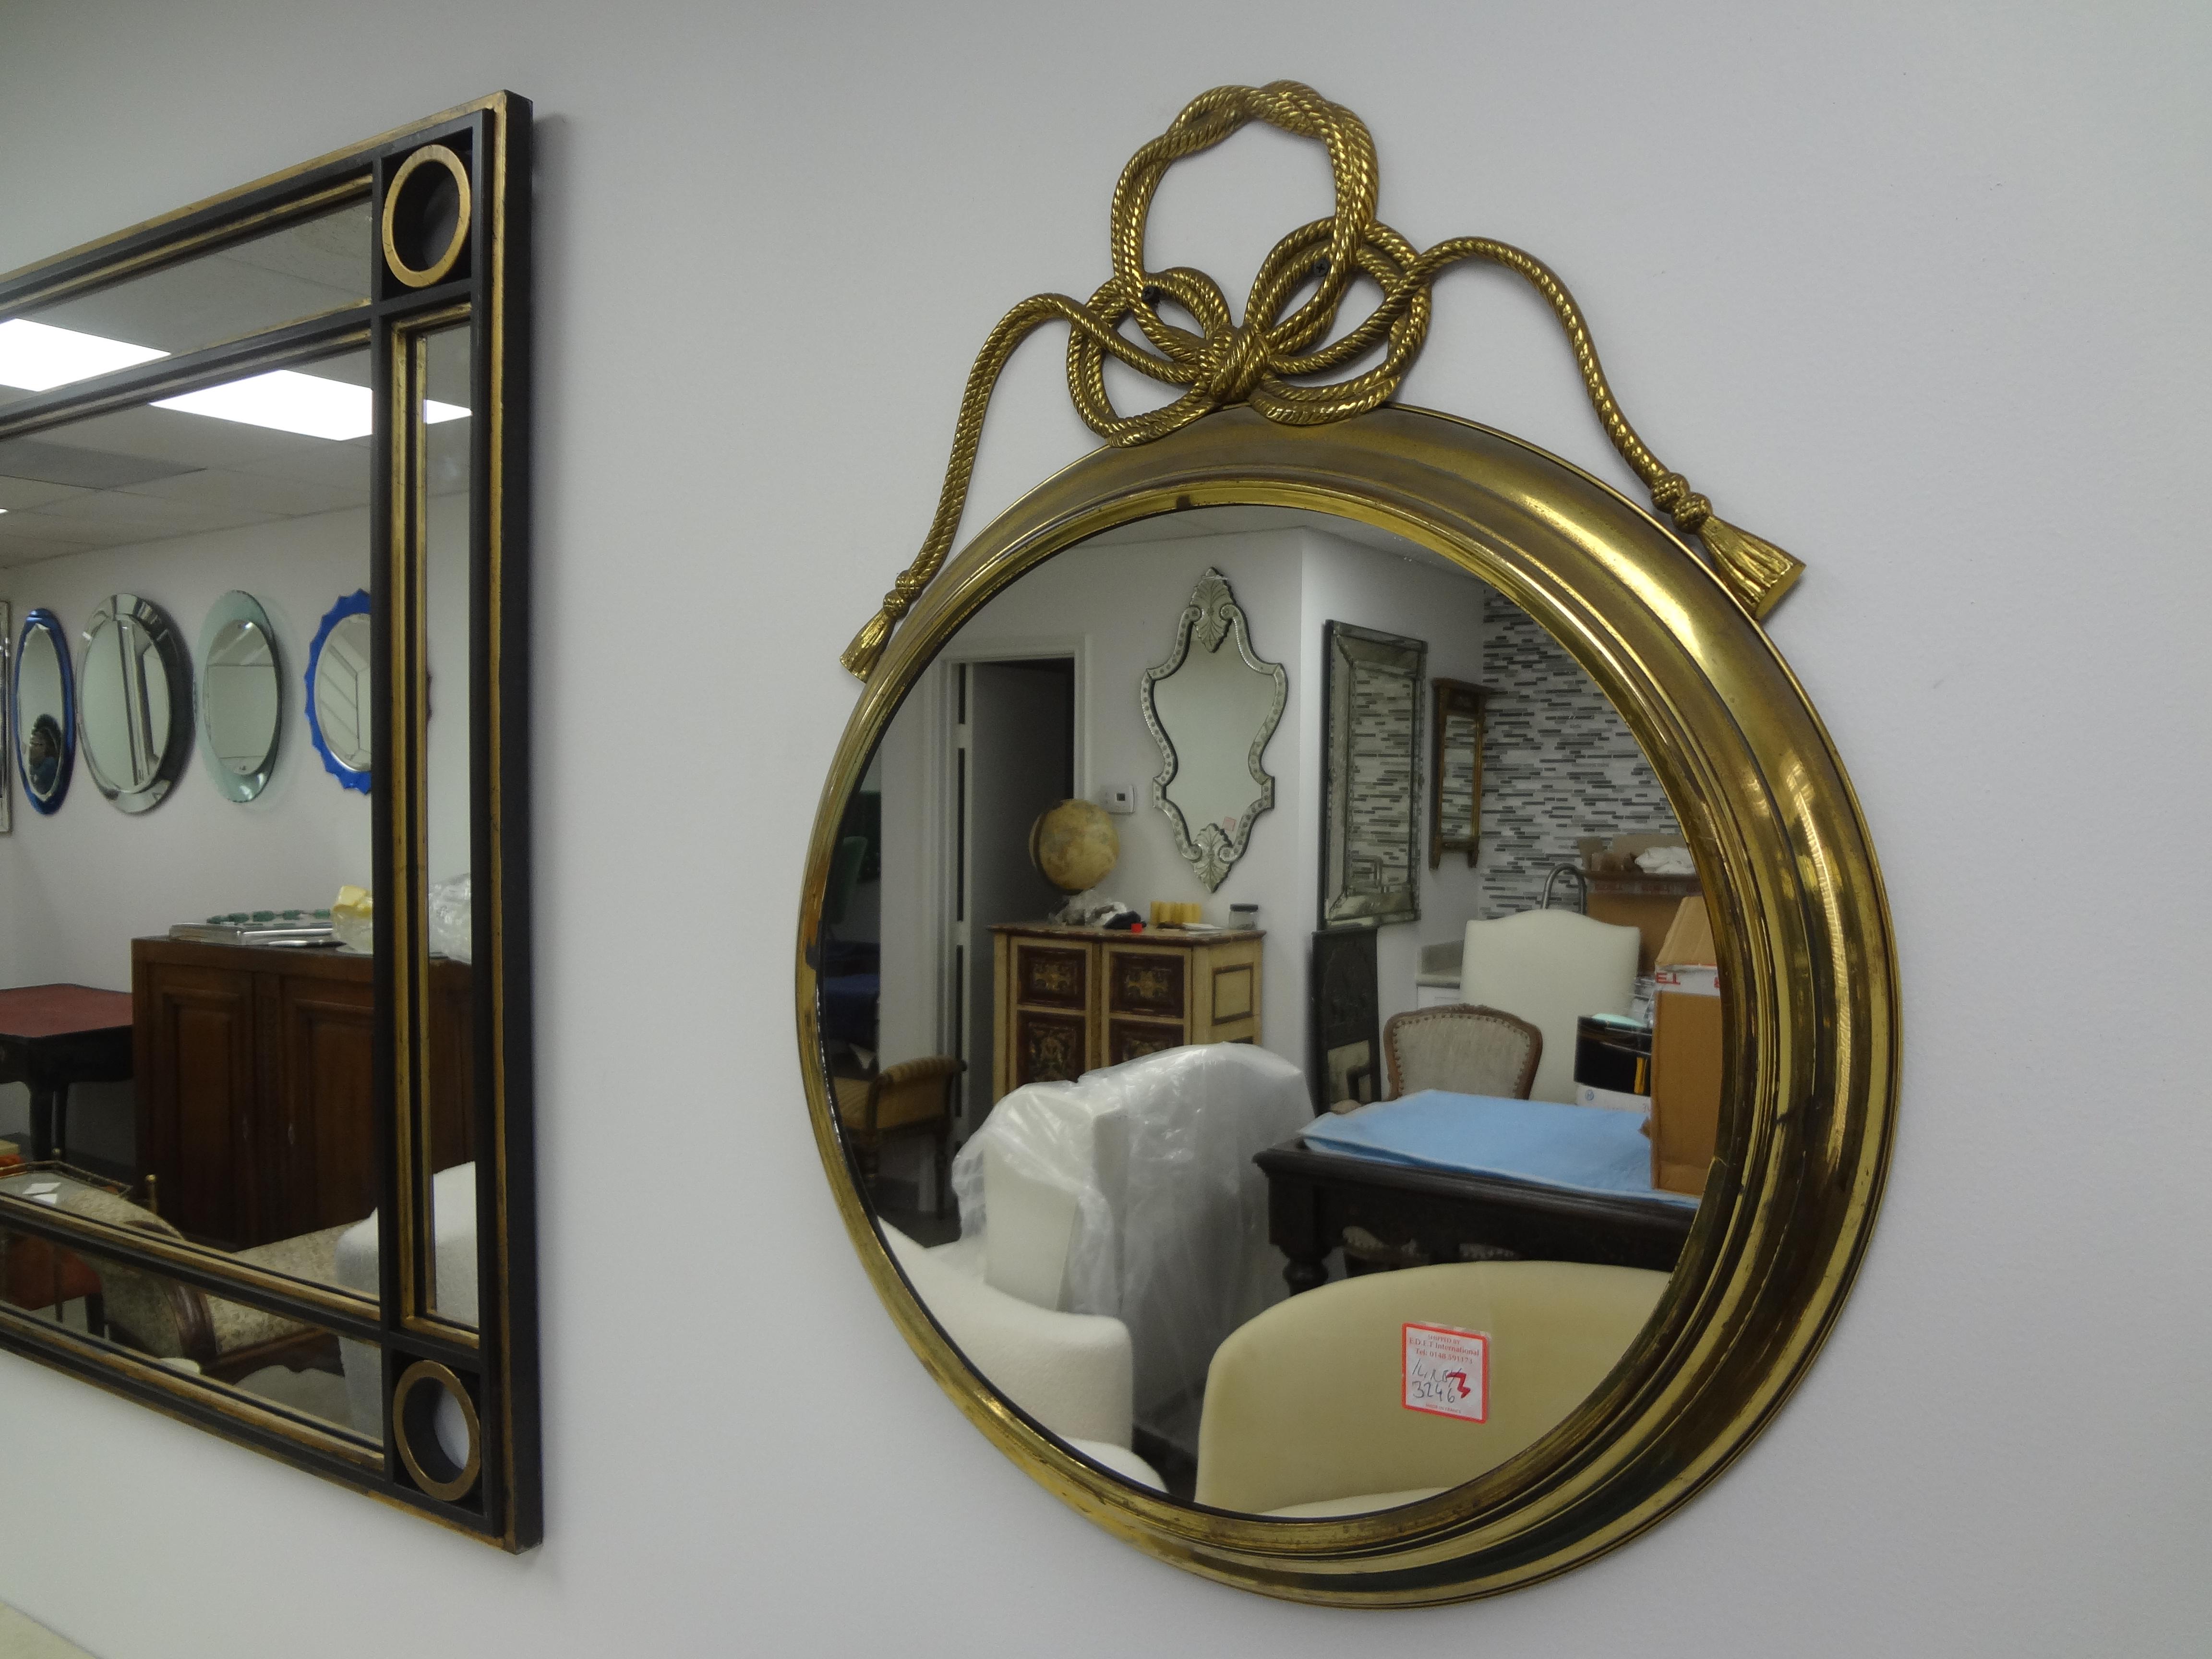 Italian Modern Brass Mirror With Bow.
Our chic Italian Hollywood Regency brass mirror is well constructed and adorned with a braded bow at the top.
Perfect in a powder room!